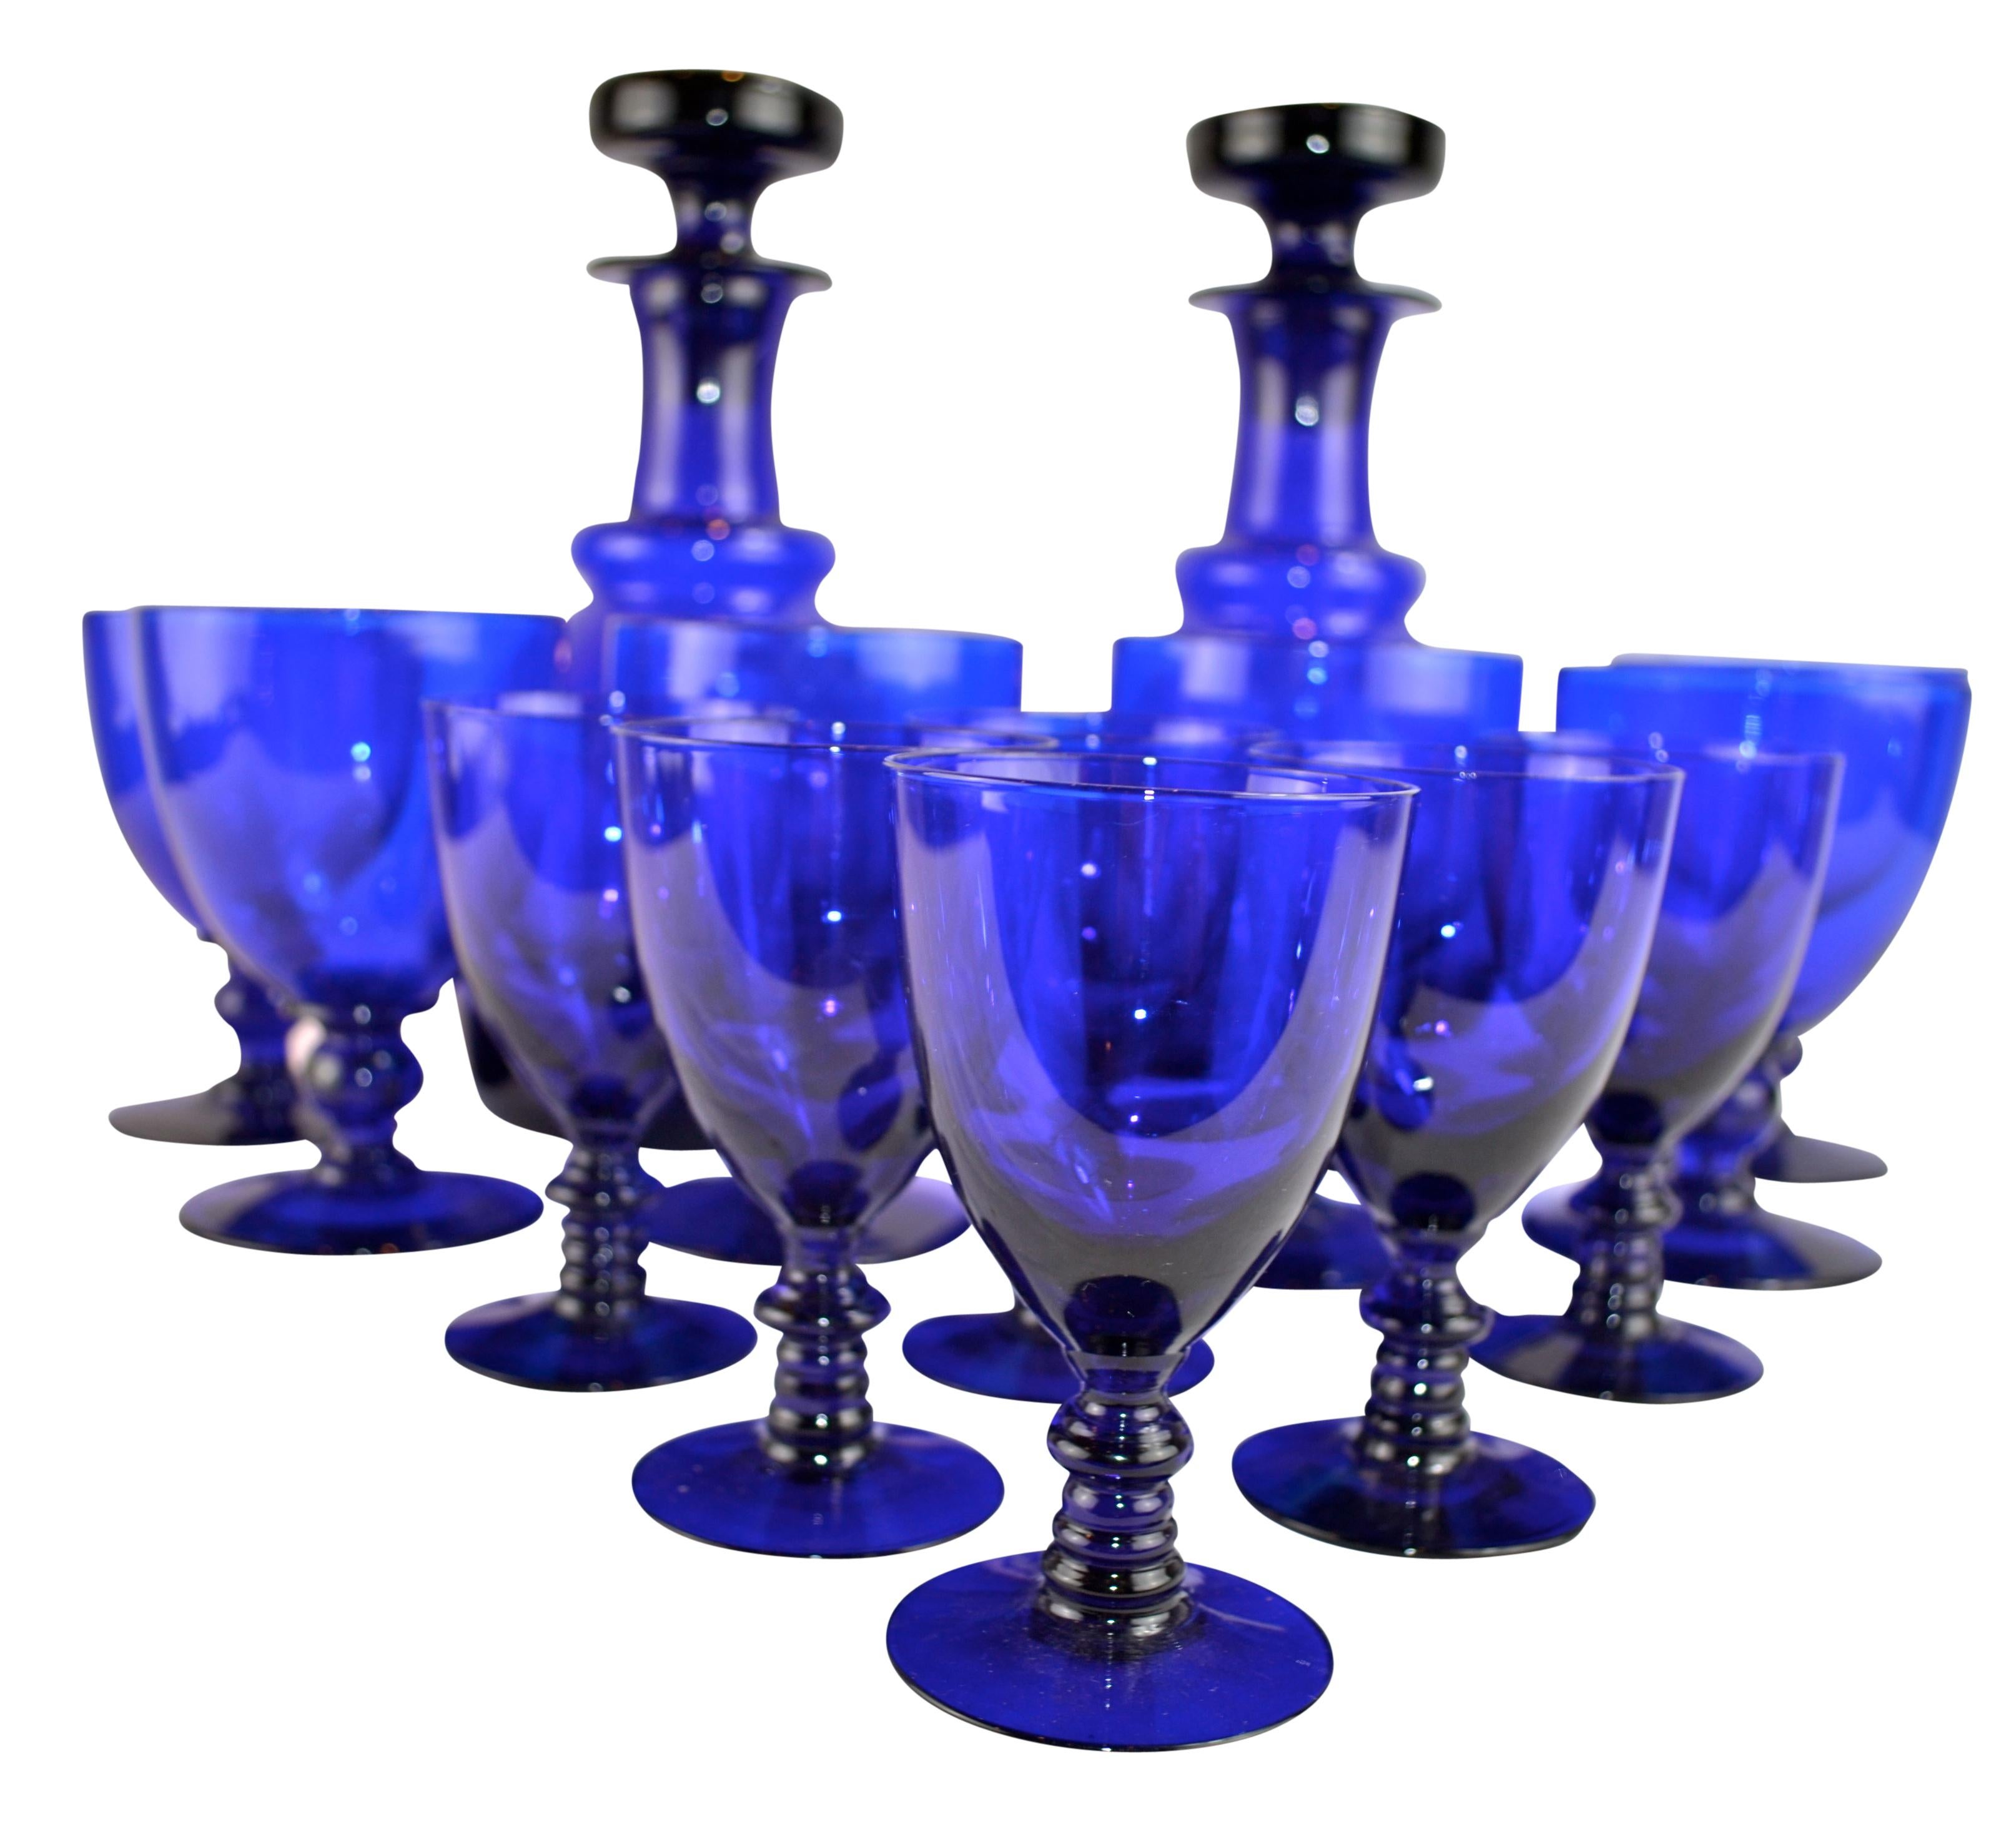 A 19th century English set of glassware in cobalt blue glass comprising two lidded decanters, six water/wine glasses, and six smaller sherry glasses, (no damage). England, circa 1840.